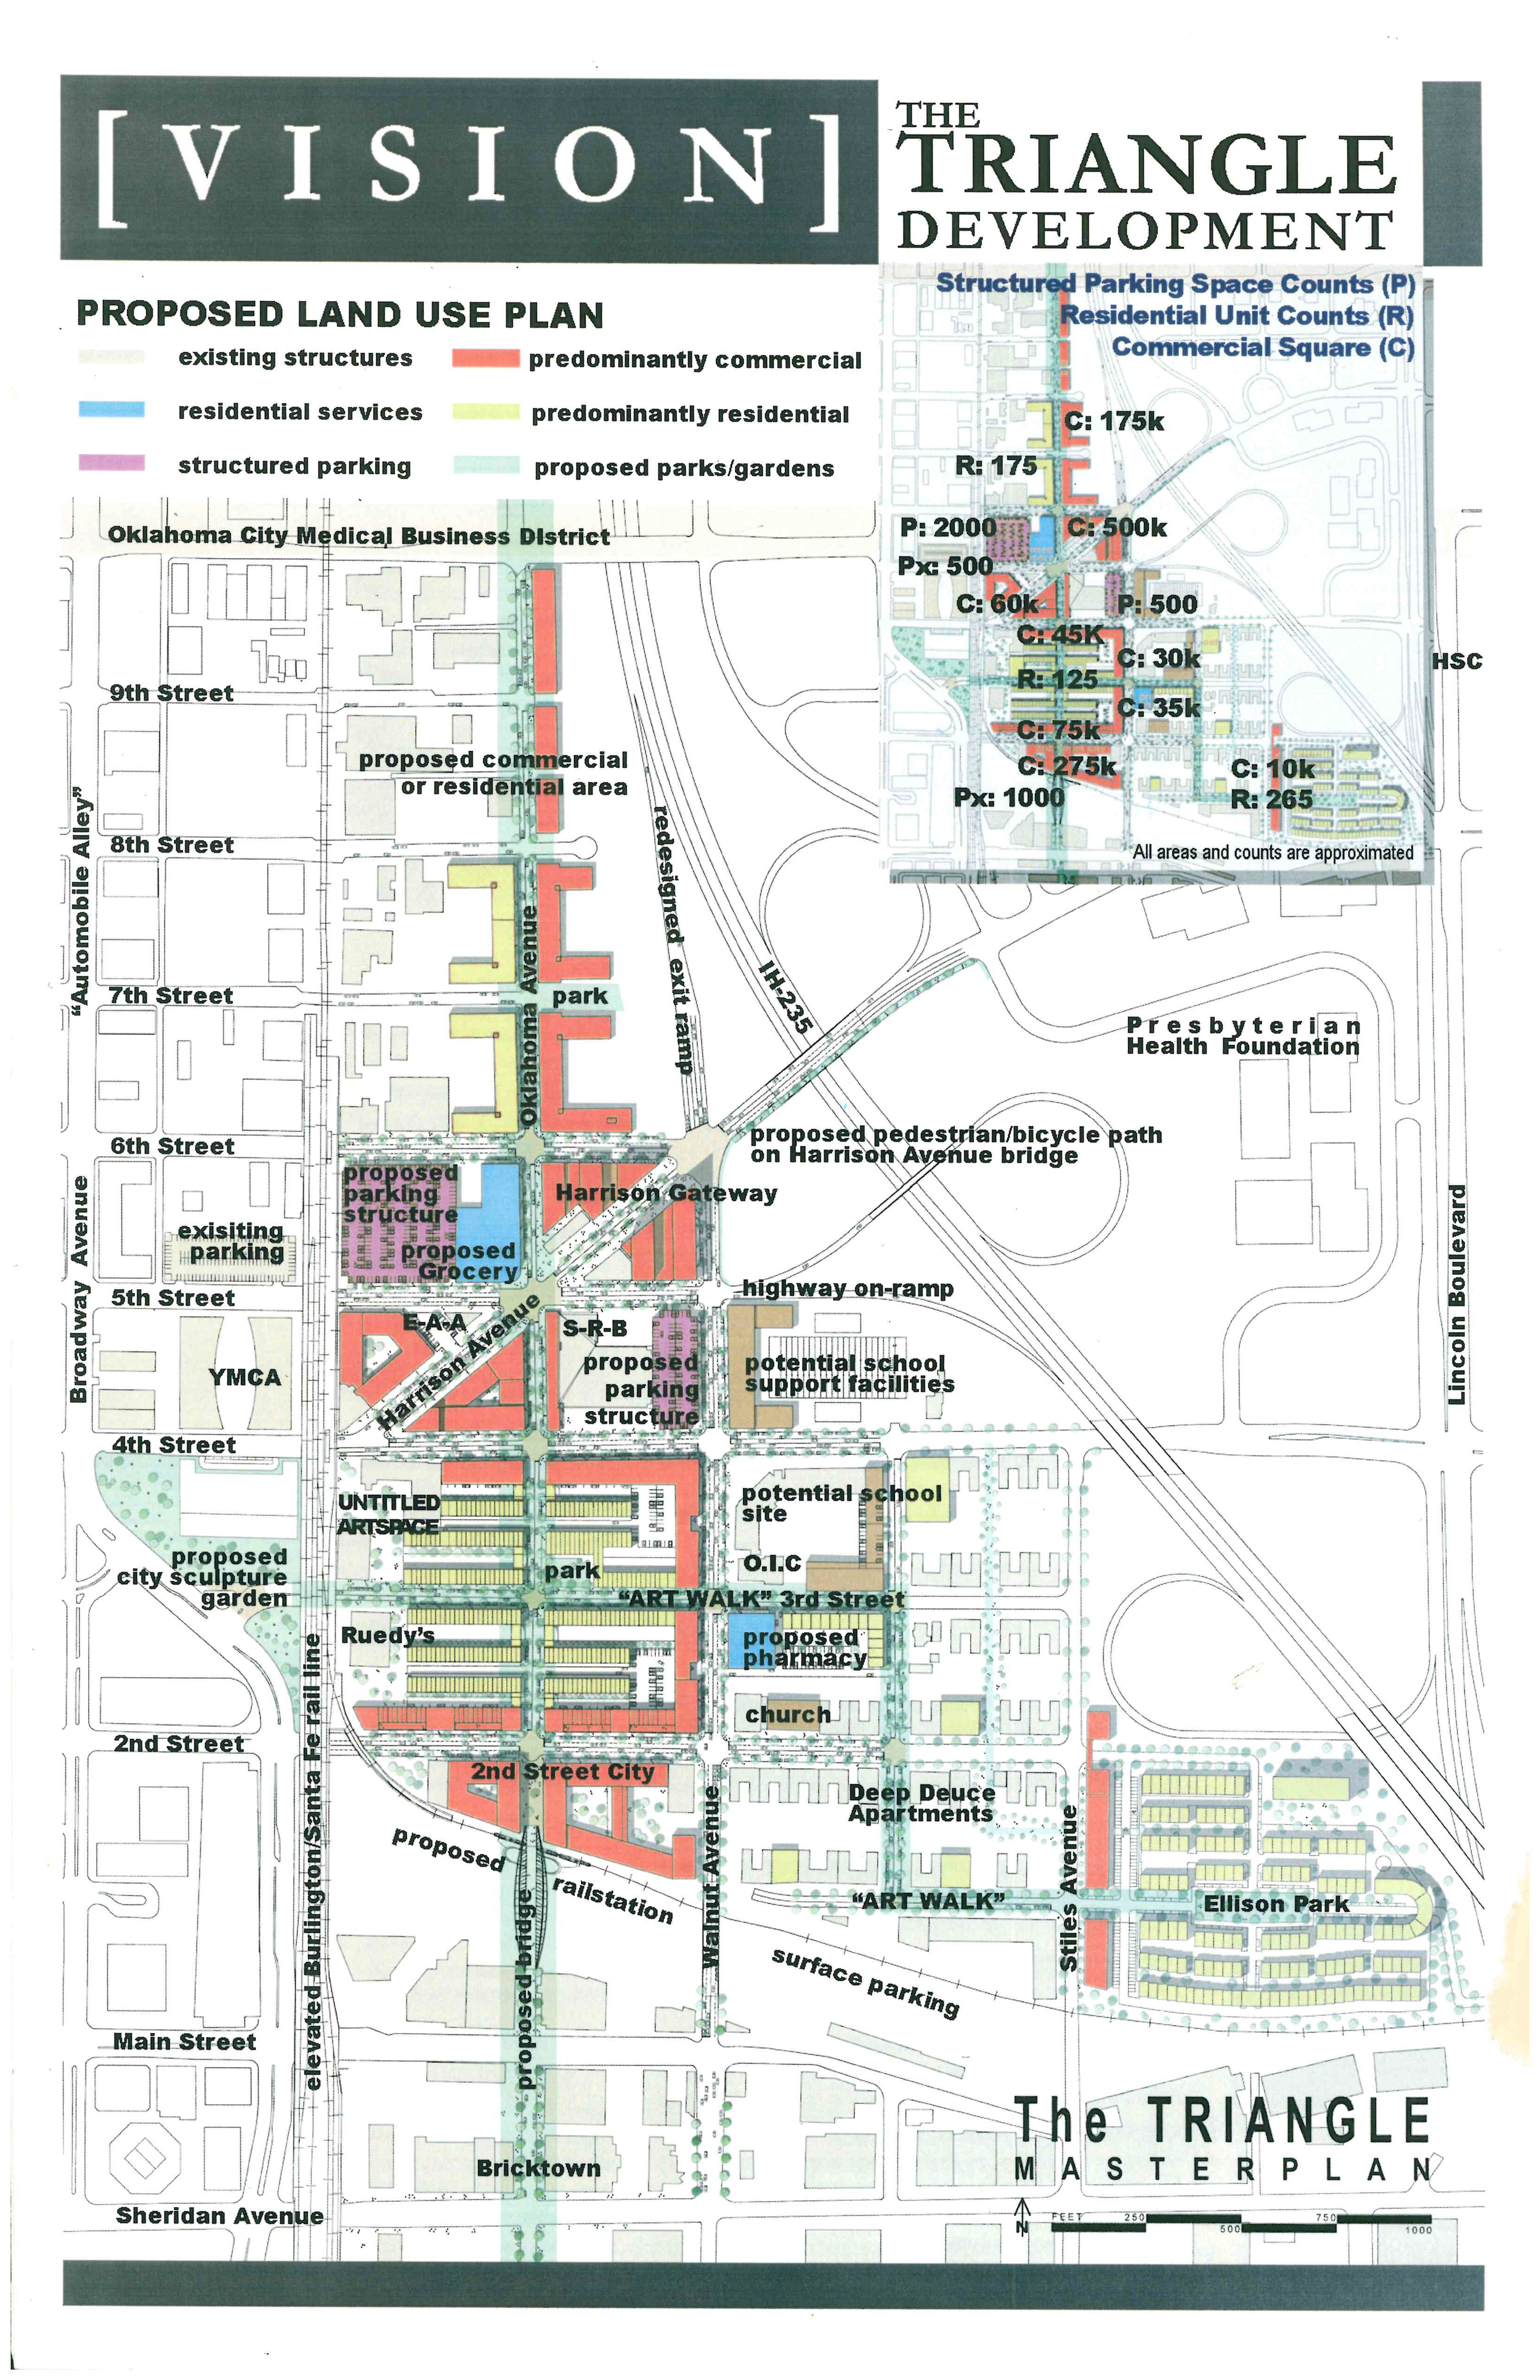 Maywood Park - The Triangle Development_Page_2.png